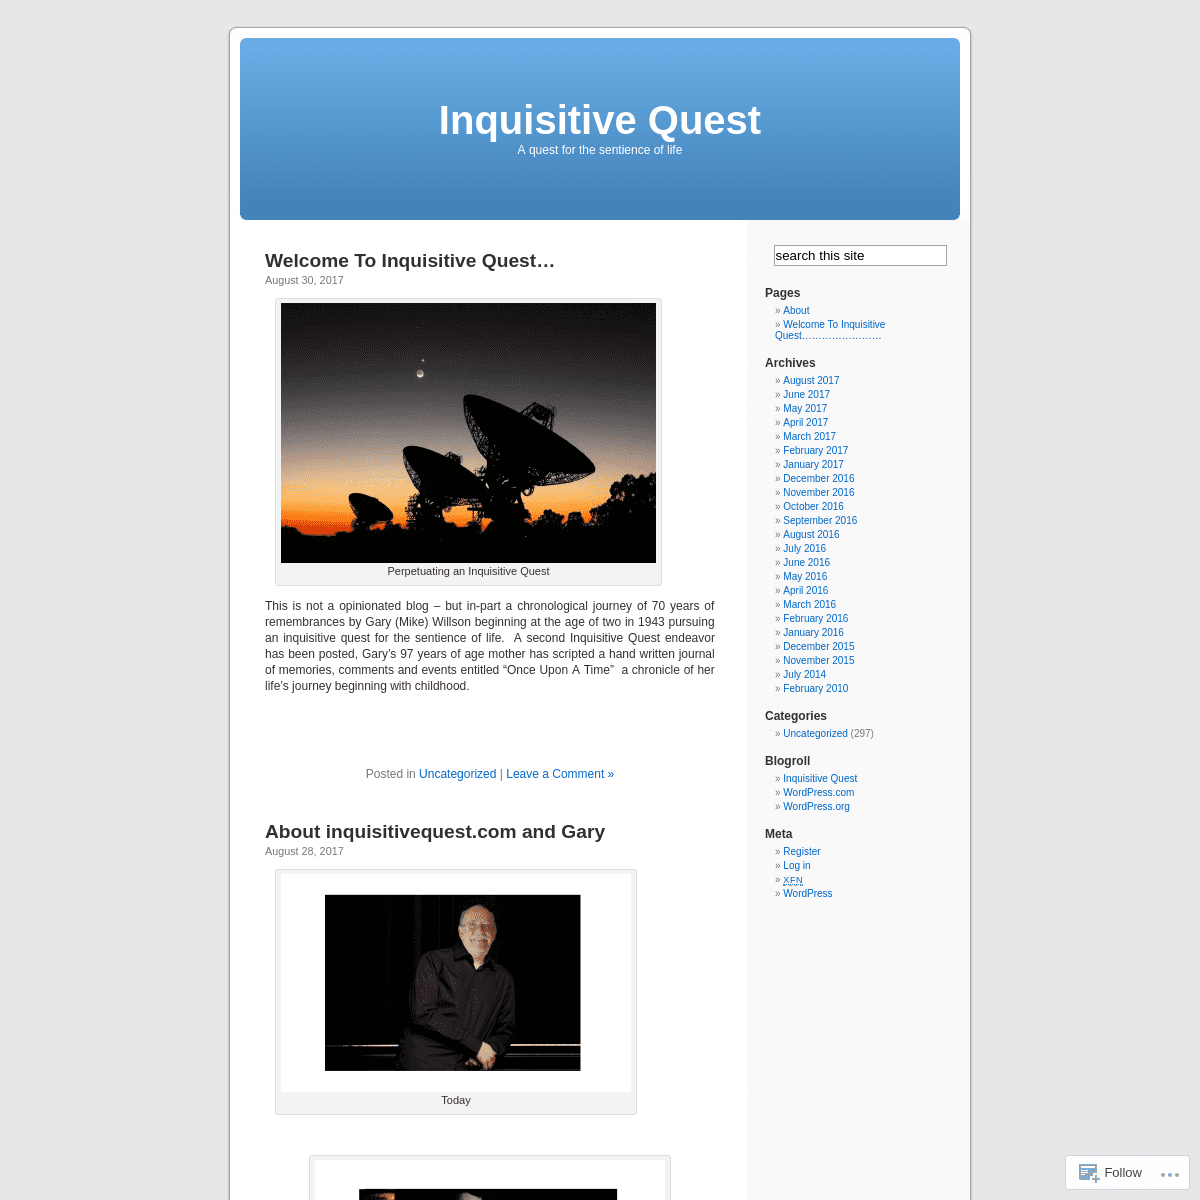 A complete backup of inquisitivequest.com